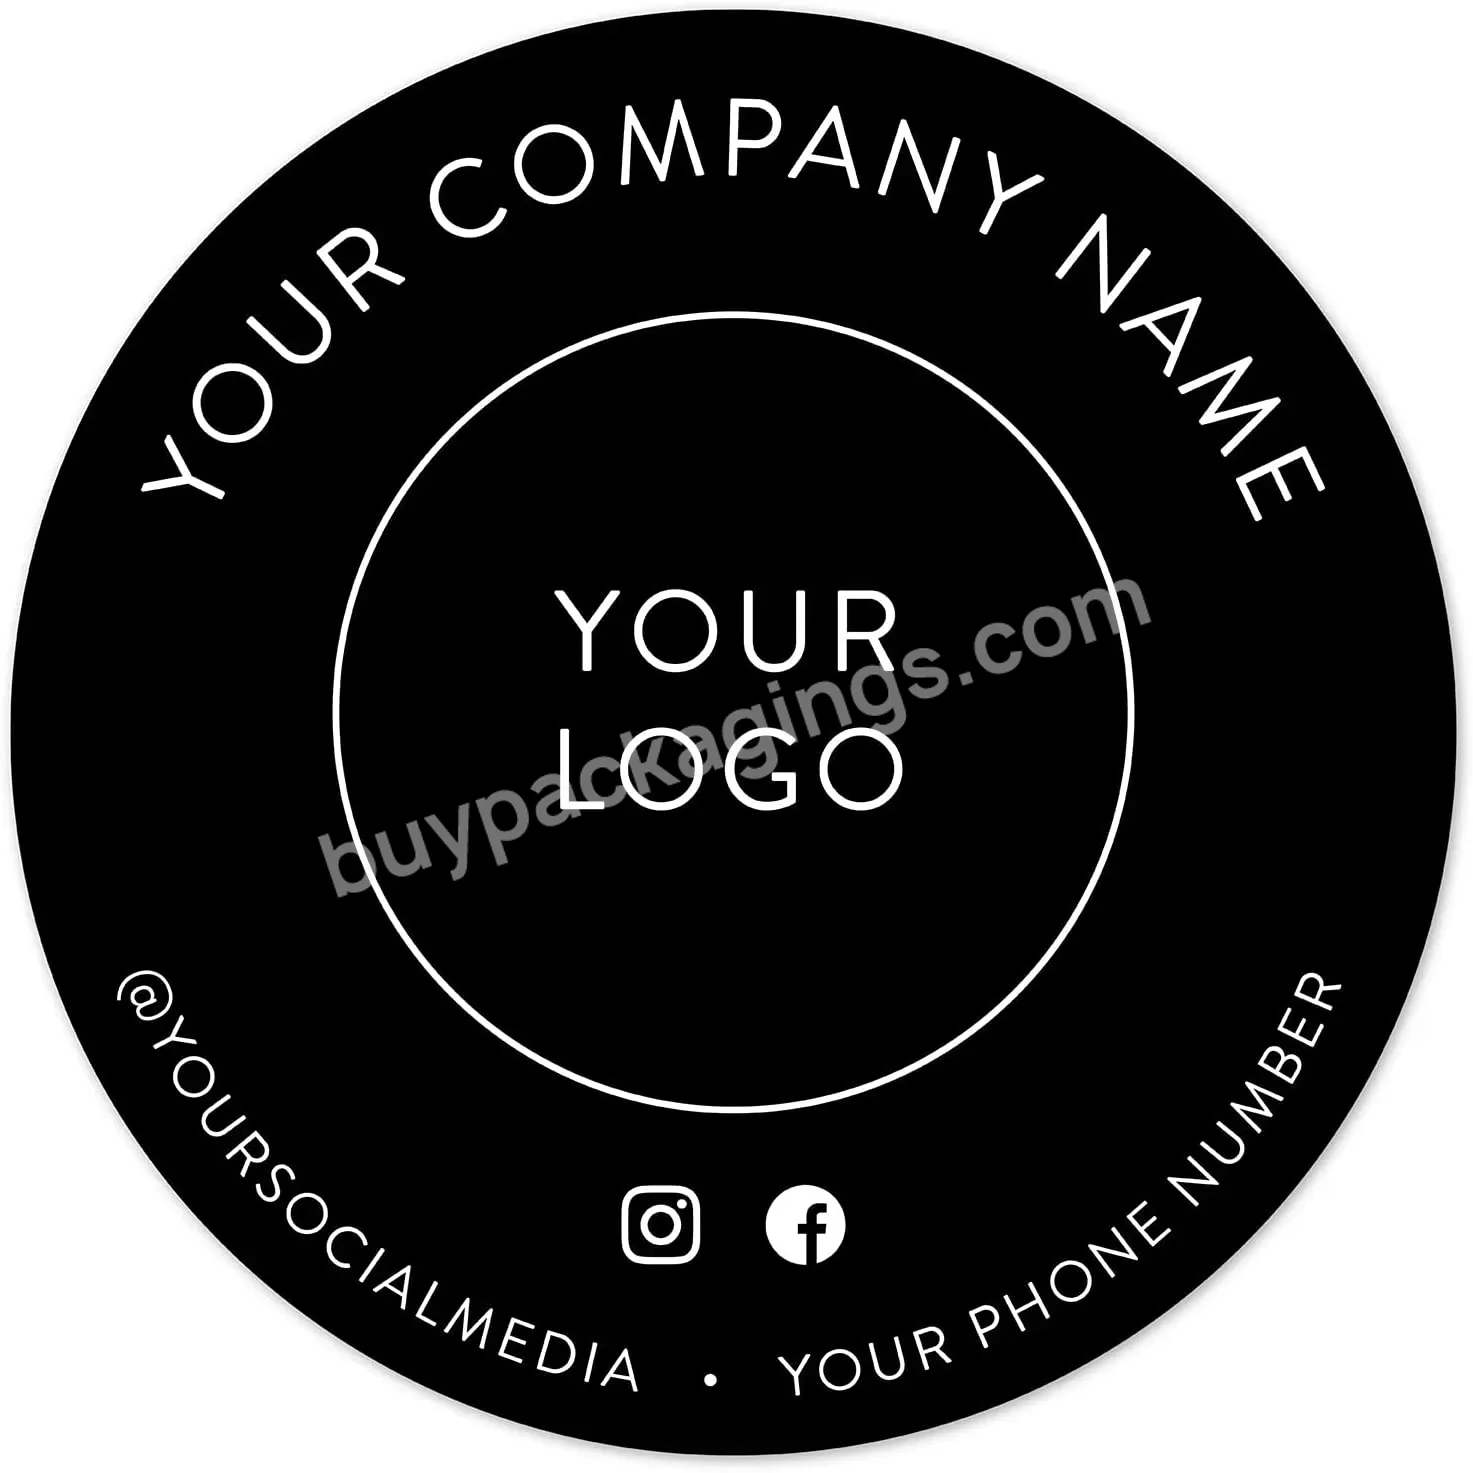 Custom Vinyl Stickers - Label Stickers For Small Business Logo - Personalized Logo Labels For Handmade - Buy Product Label Stickers Custom Printing,Customized Sticker Roll Logo Label,Custom Label Stickers.